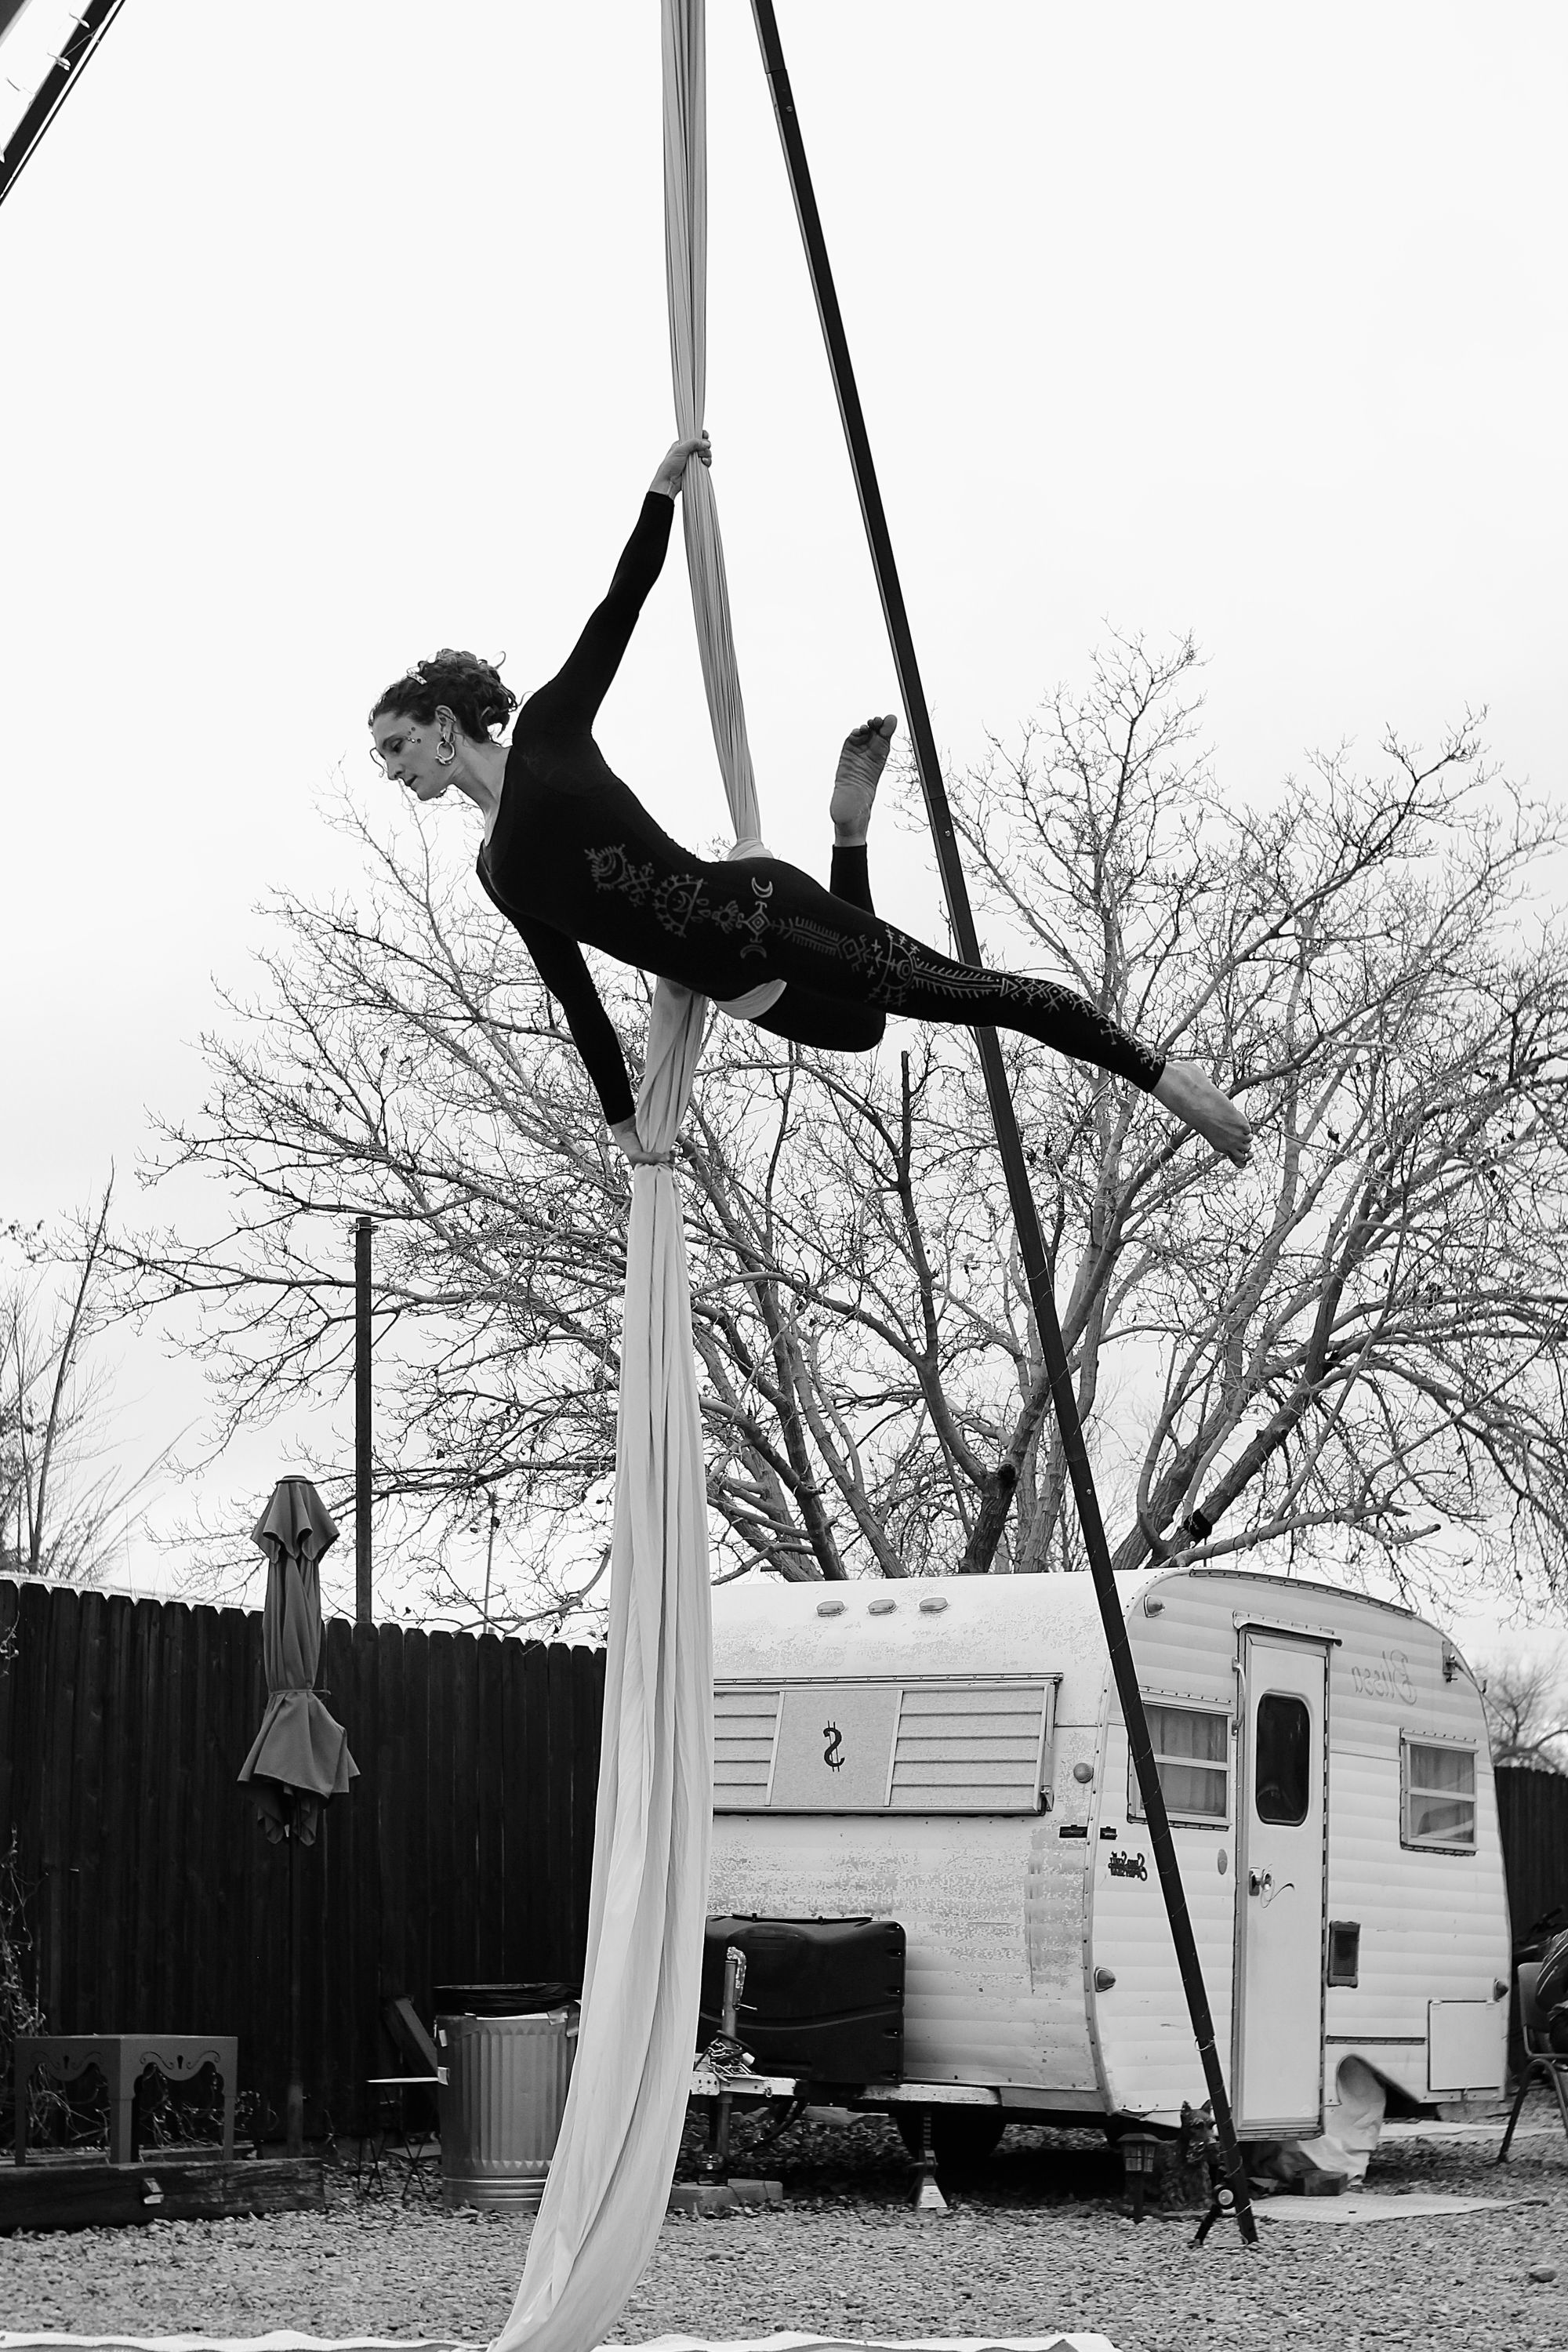 Woman performing aerial silks outside on white fabric while in front of small vintage camper trailer 